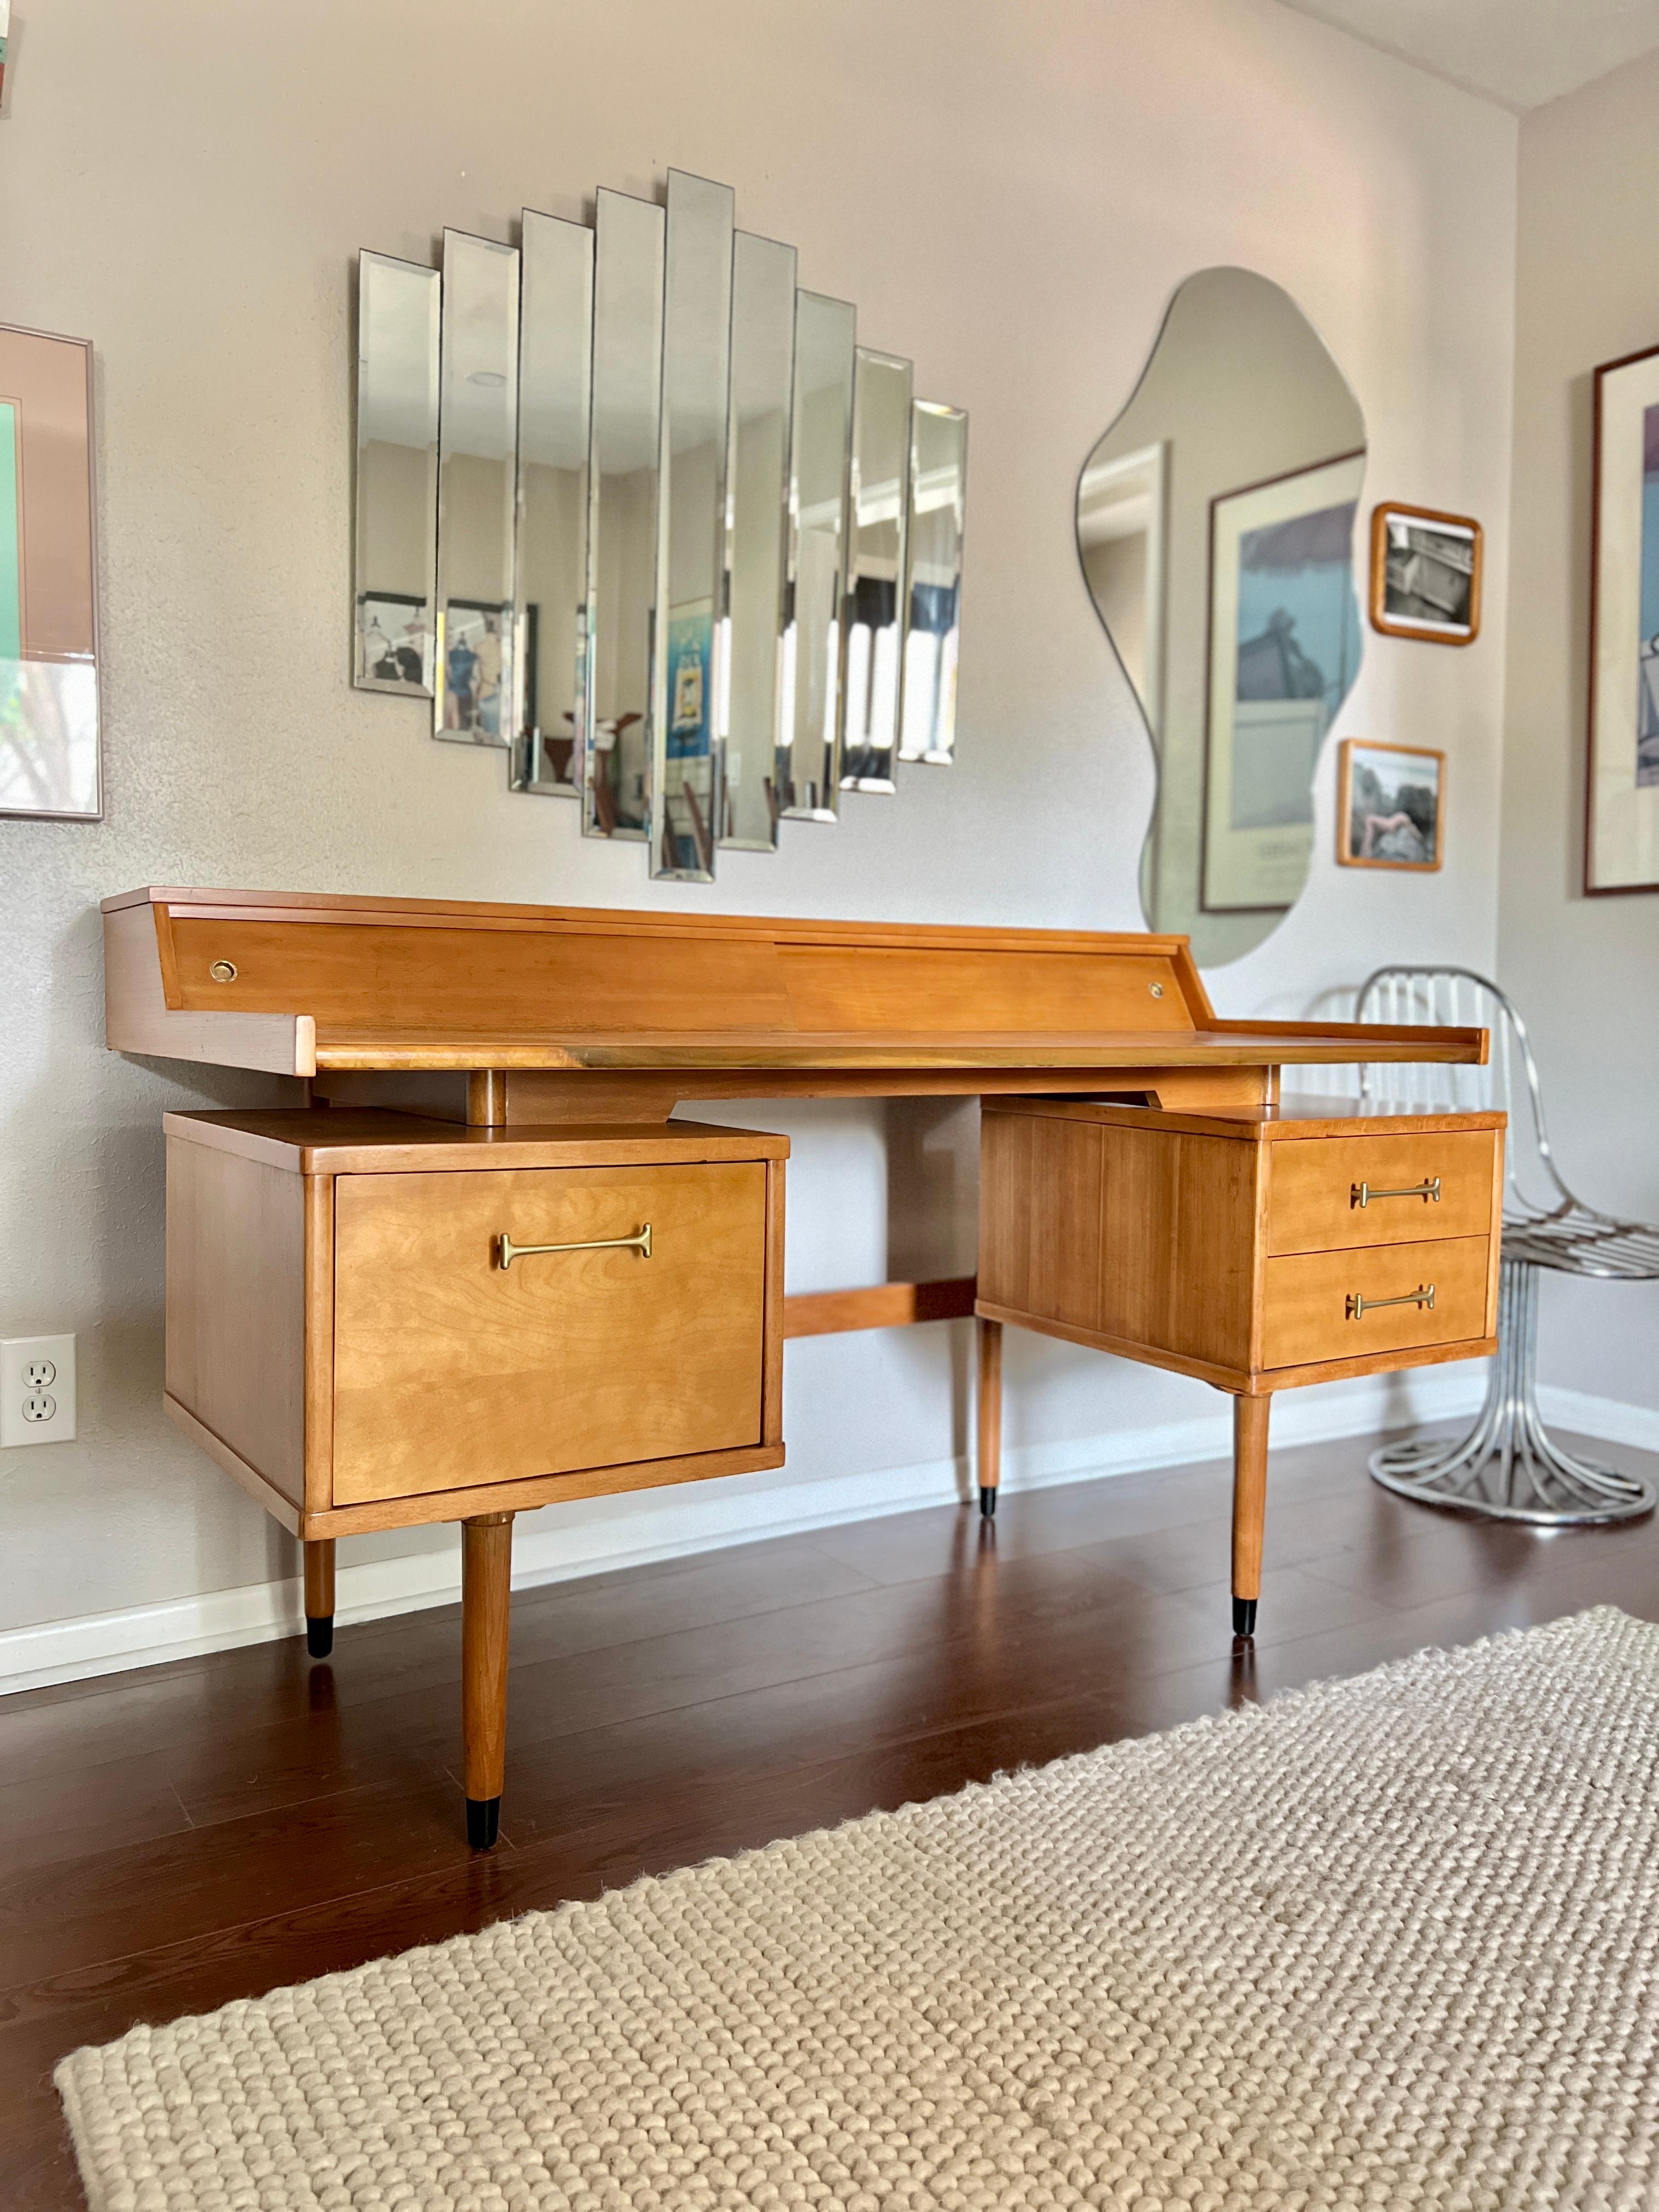 Wonderful vintage “Biscayne” floating top desk by Drexel circa 1960s. The left drawer has a file slot which can be removed if needed and on the right side has two dovetailed drawers. Top compartments have two sliding doors with compartments inside.